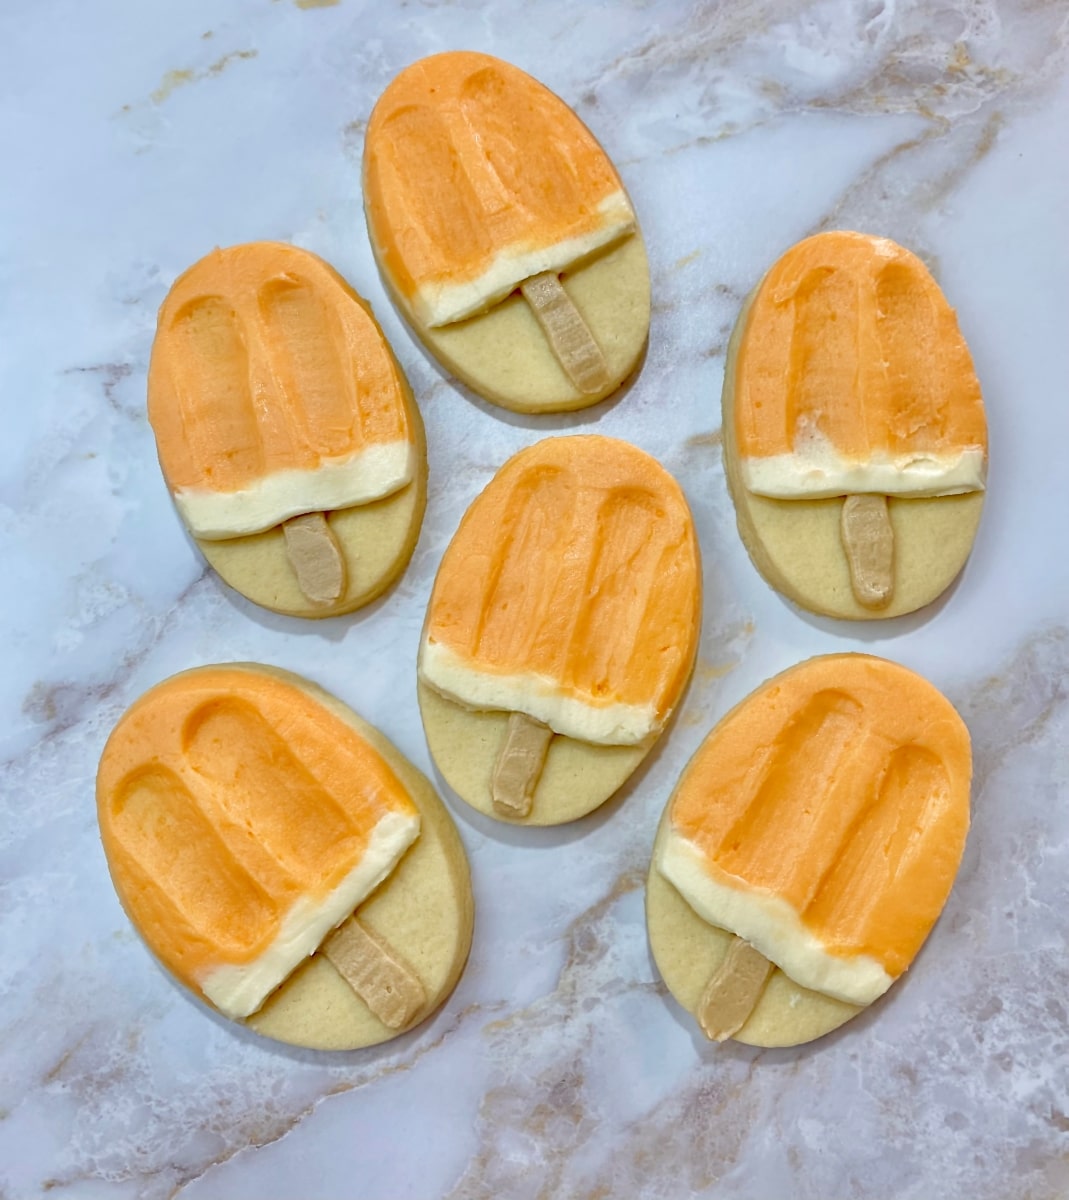 sugar cookies decorated like creamsicles with orange flavored buttercream frosting